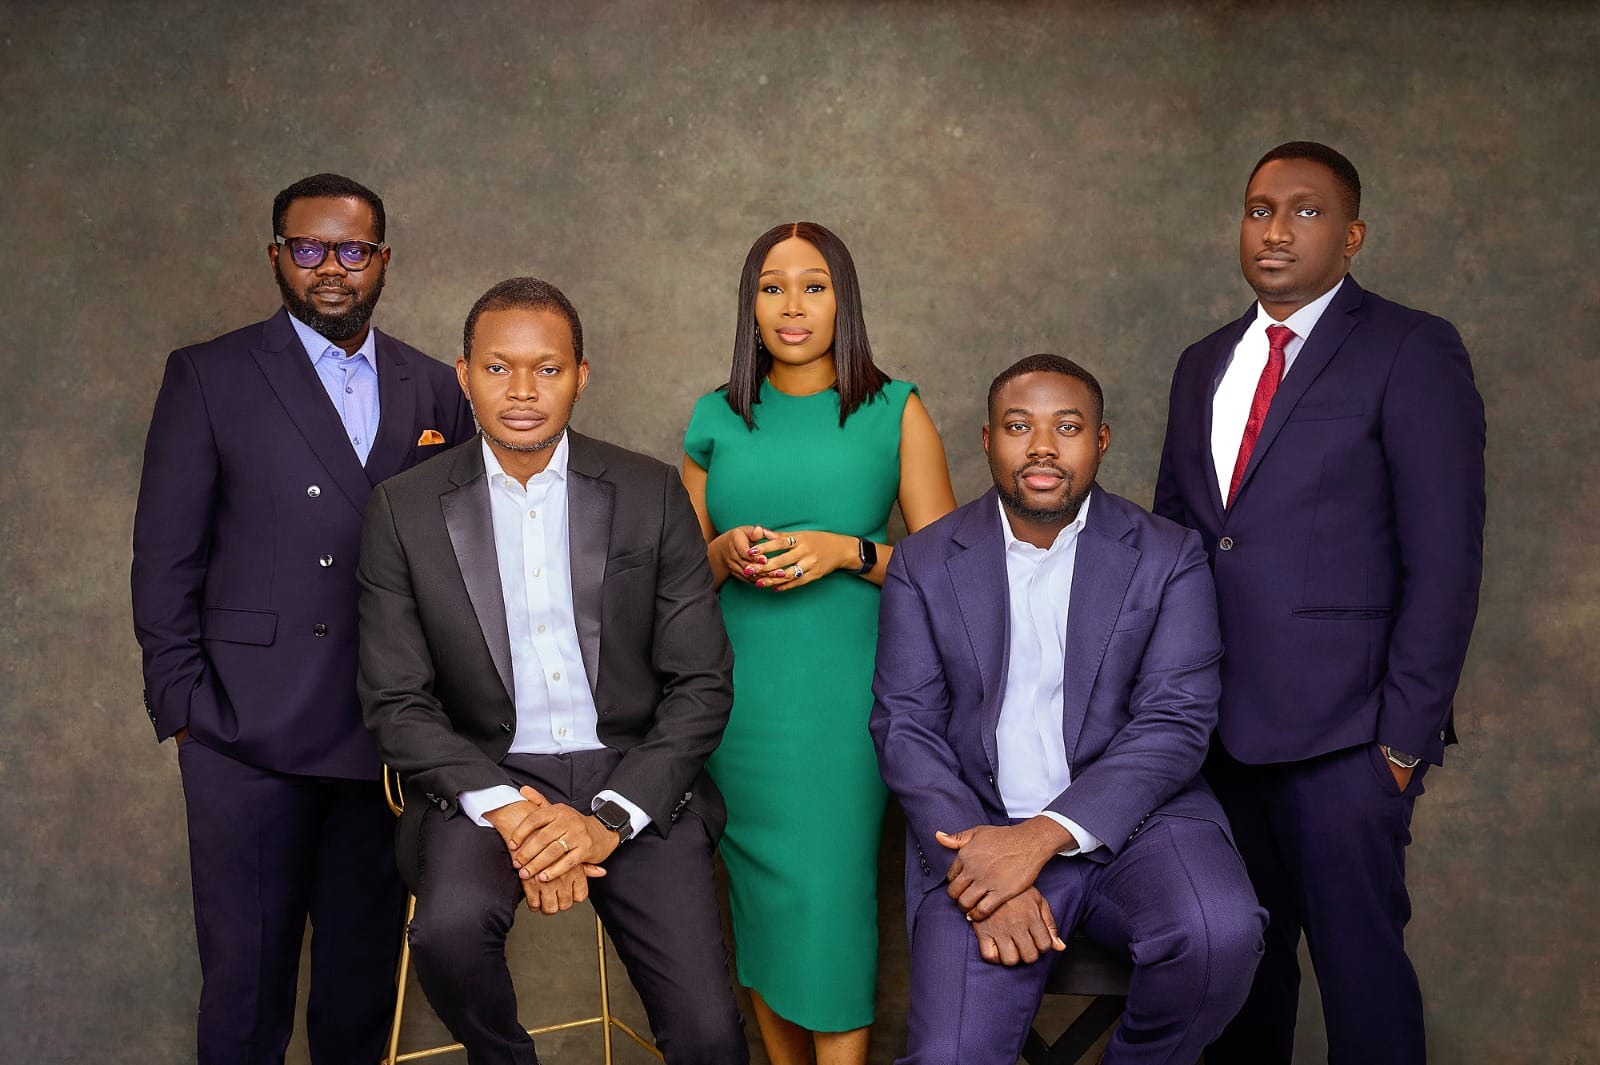 Nigerian fintech BudPay is connecting African businesses beyond borders with its innovative payment solution BudPay Business